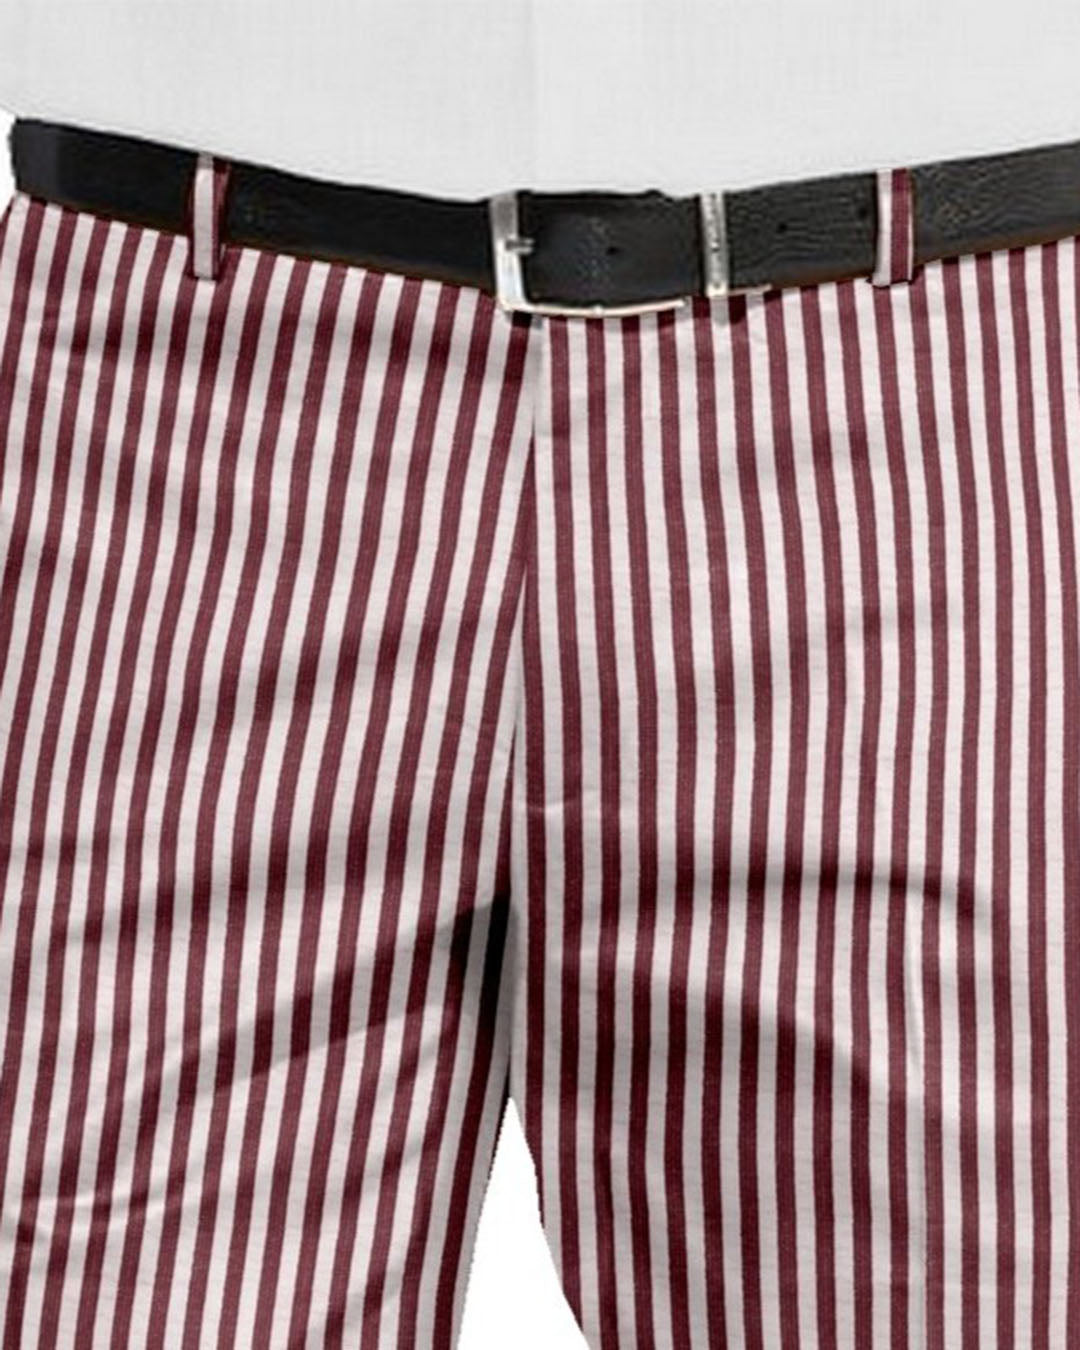 Shorts in Rose Red White Bengal Stripes Seersucker